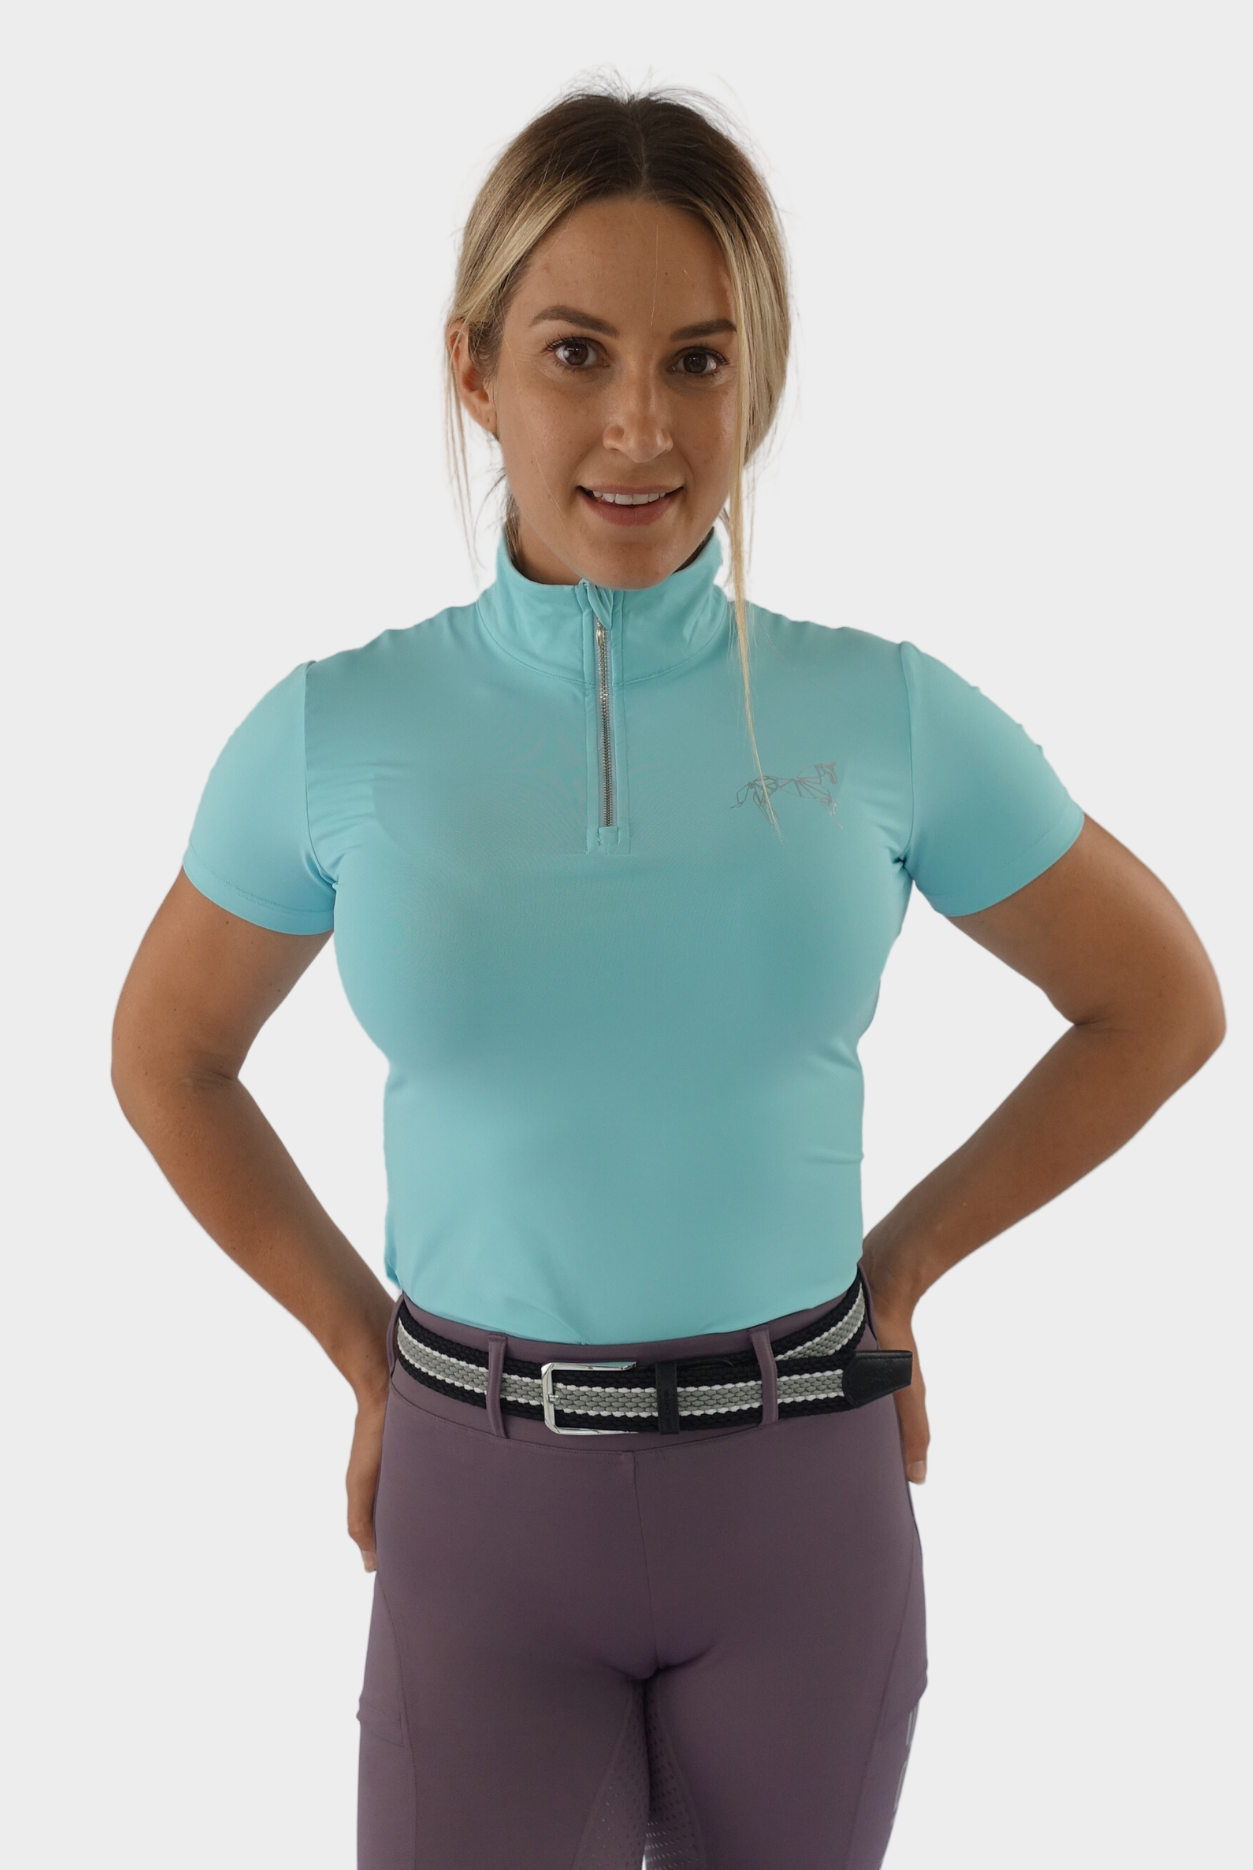 Vibrant ocean blue equestrian base layer with moisture-wicking fabric and a seamless design for a smooth and streamlined look.